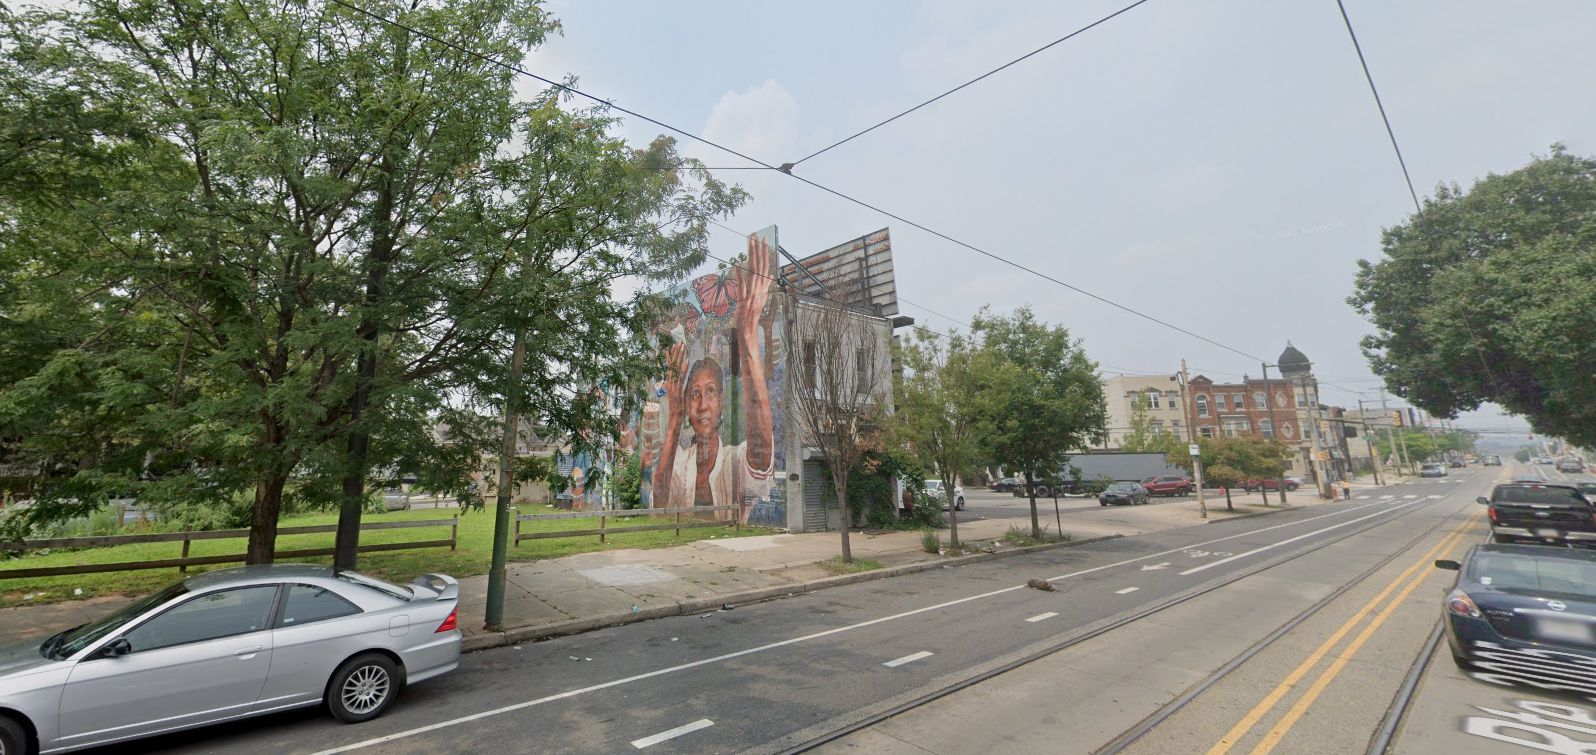 Mural at 4328 Lancaster Avenue prior to redevelopment. Looking west. July 2021. Credit: Google Maps